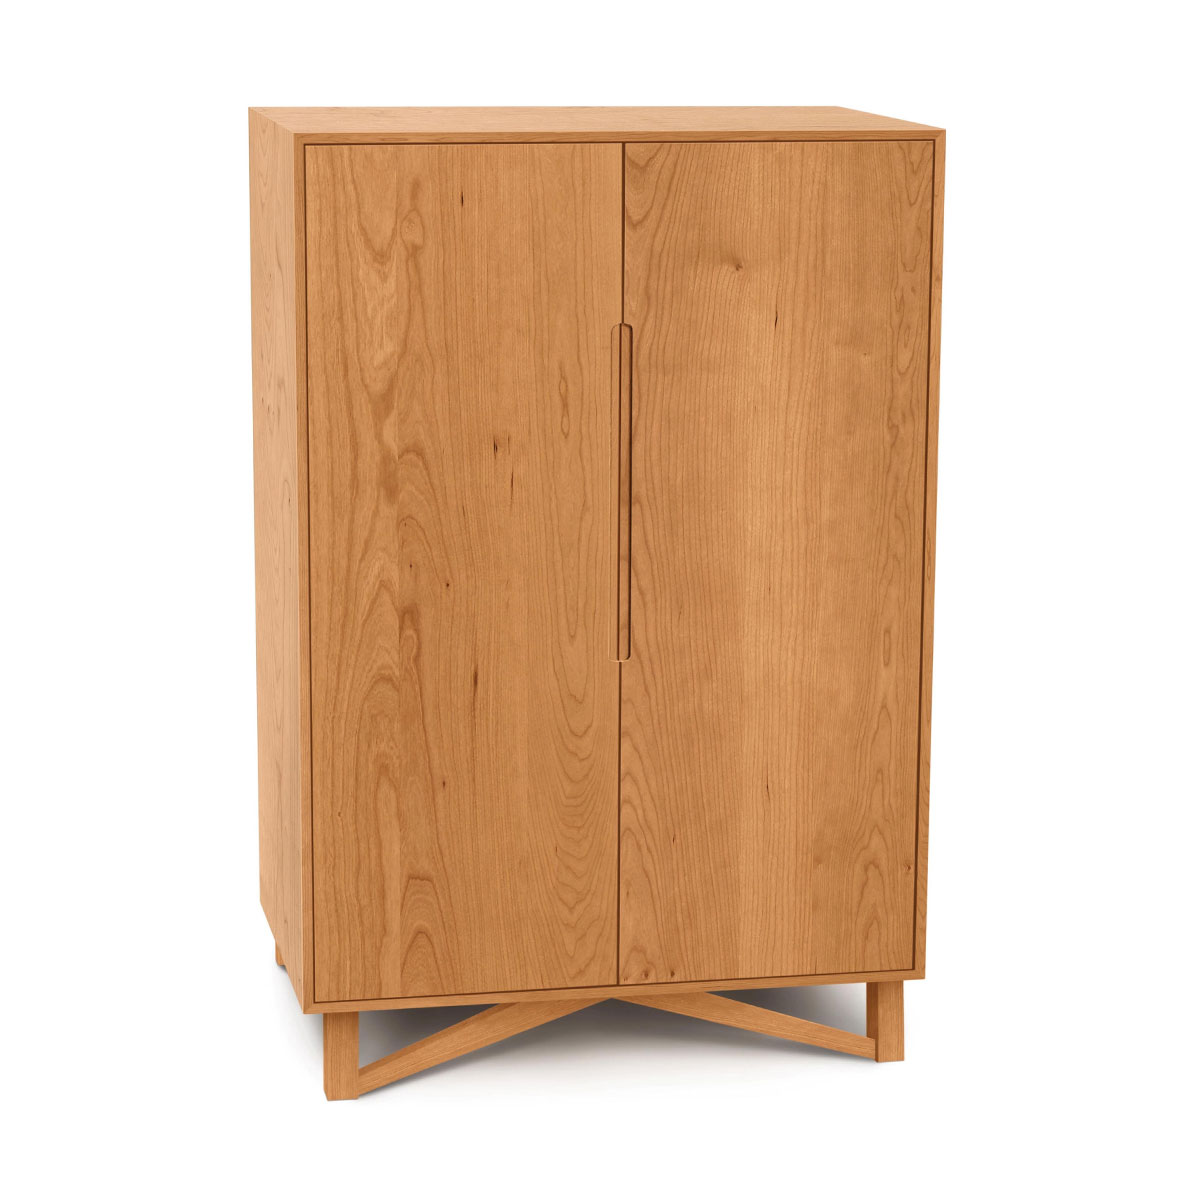 Copeland Exeter Bar Cabinet in Cherry